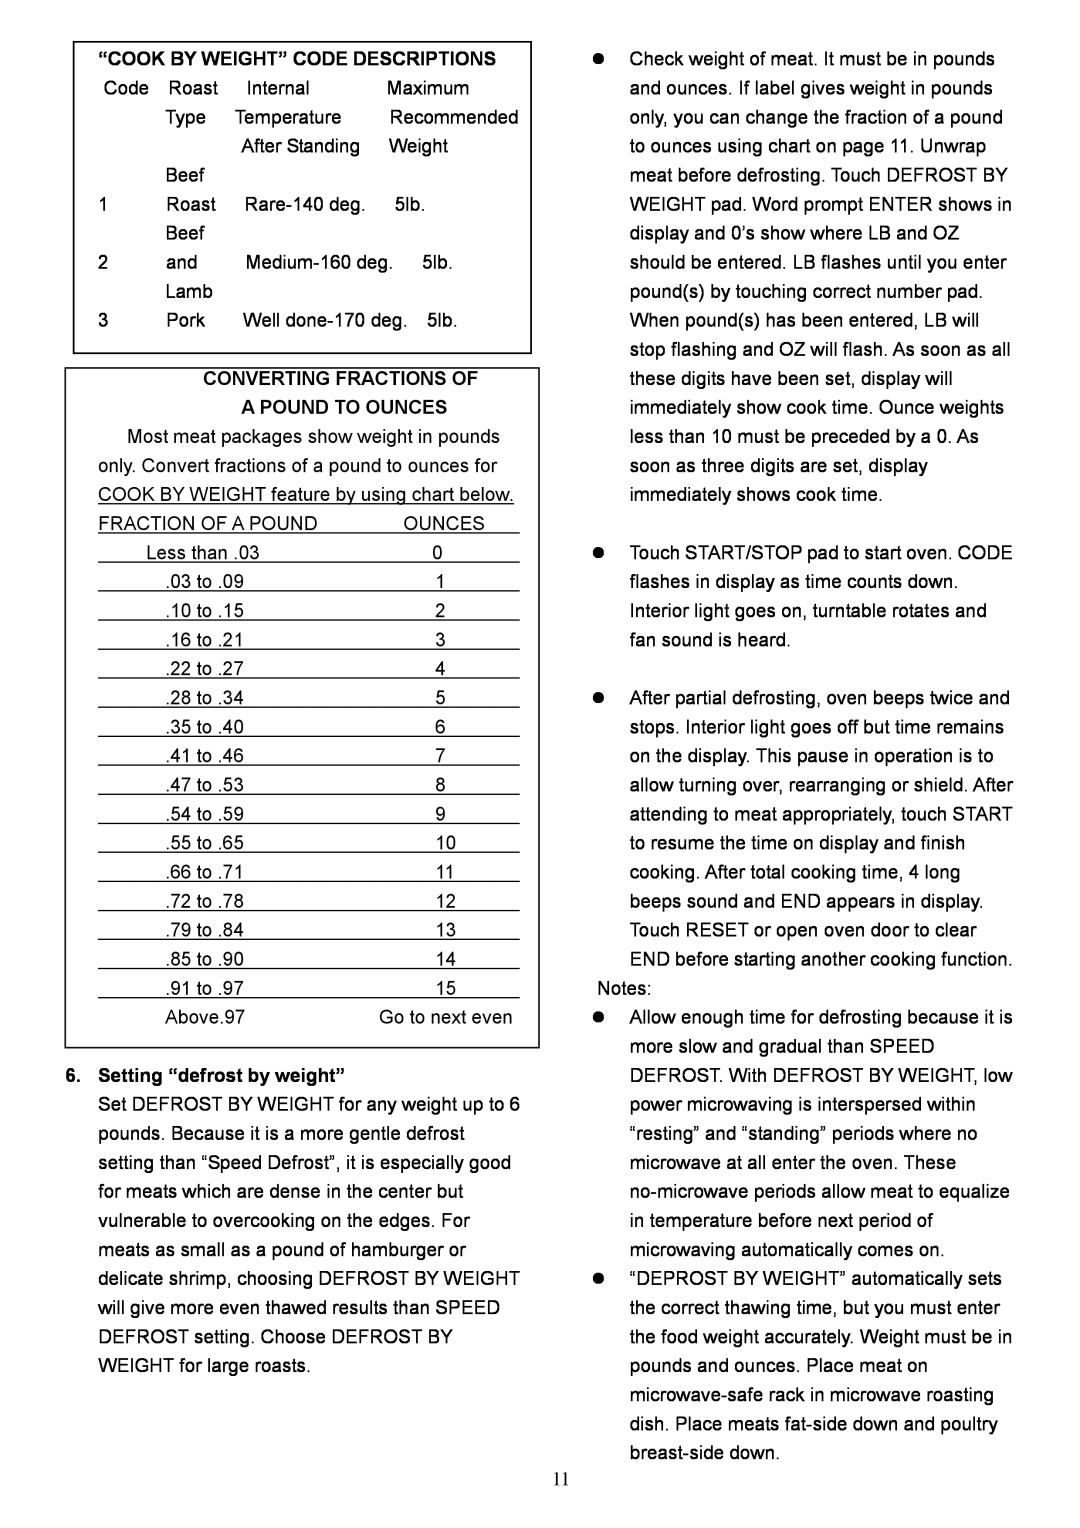 Danby DMW1048SS owner manual “Cook By Weight” Code Descriptions, Converting Fractions Of, Setting “defrost by weight” 